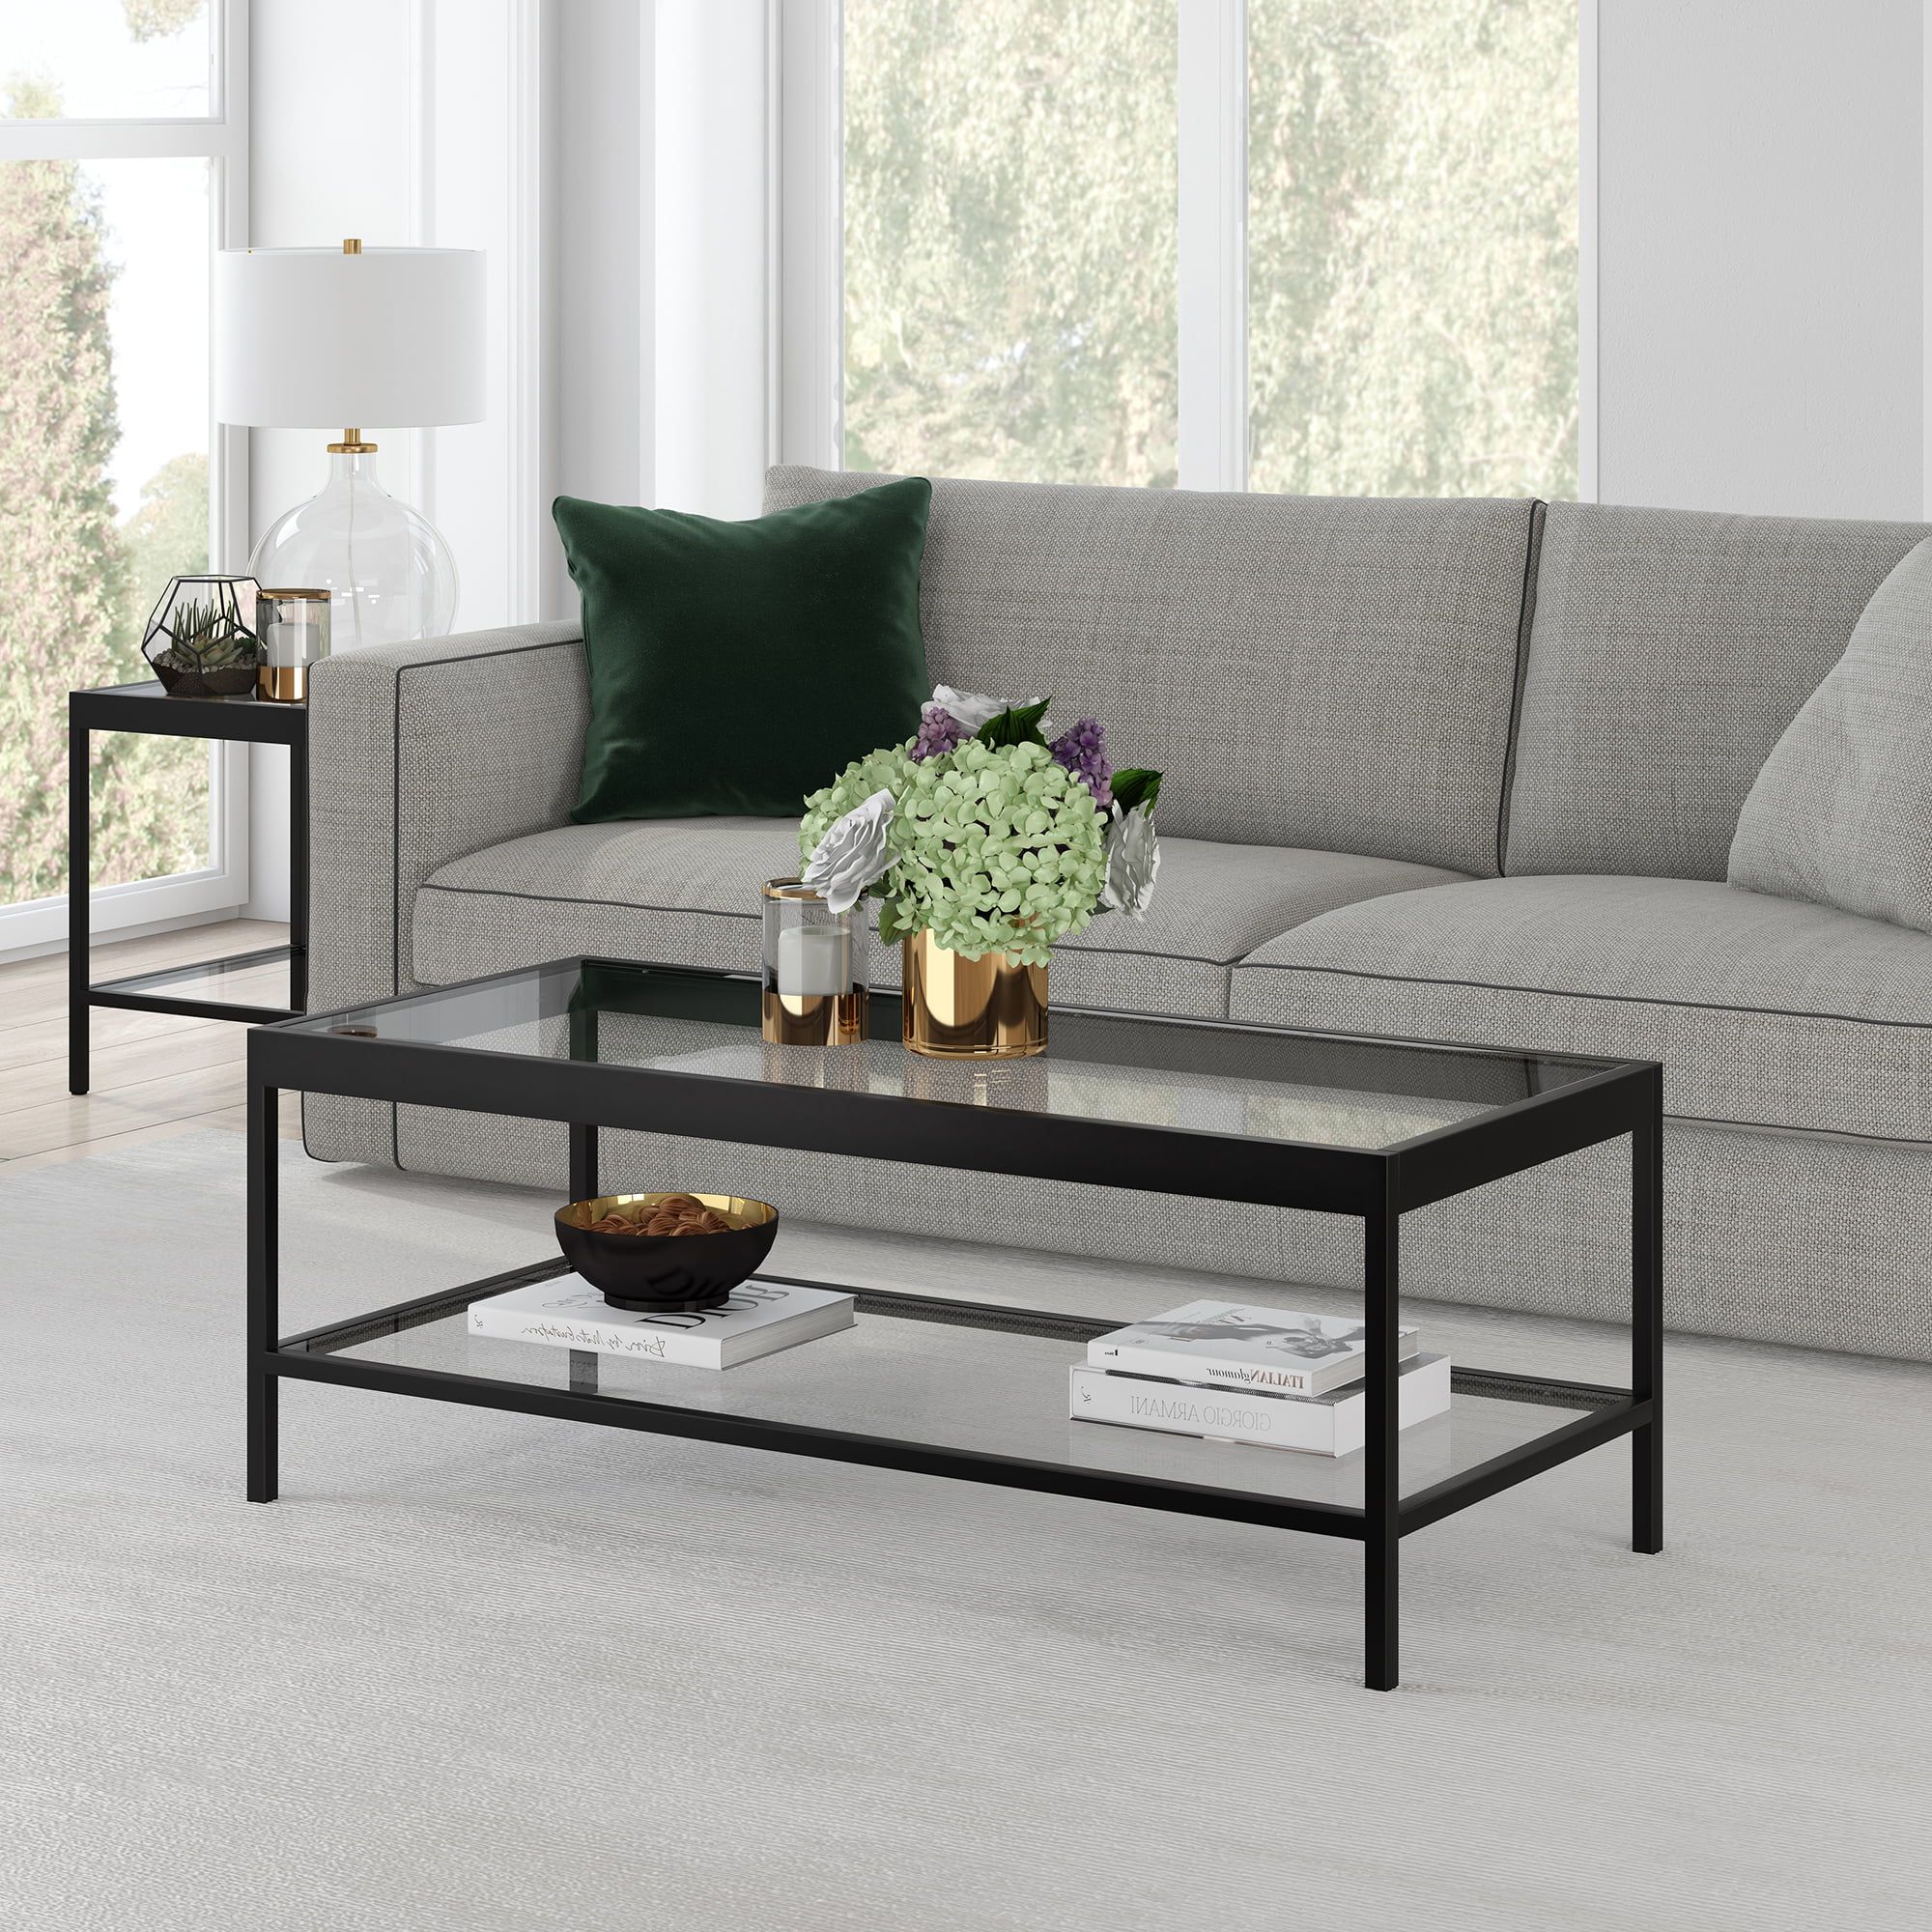 Preferred Modern Coffee Table With Open Shelf, Rectangular Table For Living Room Intended For Coffee Tables With Open Storage Shelves (Photo 8 of 15)